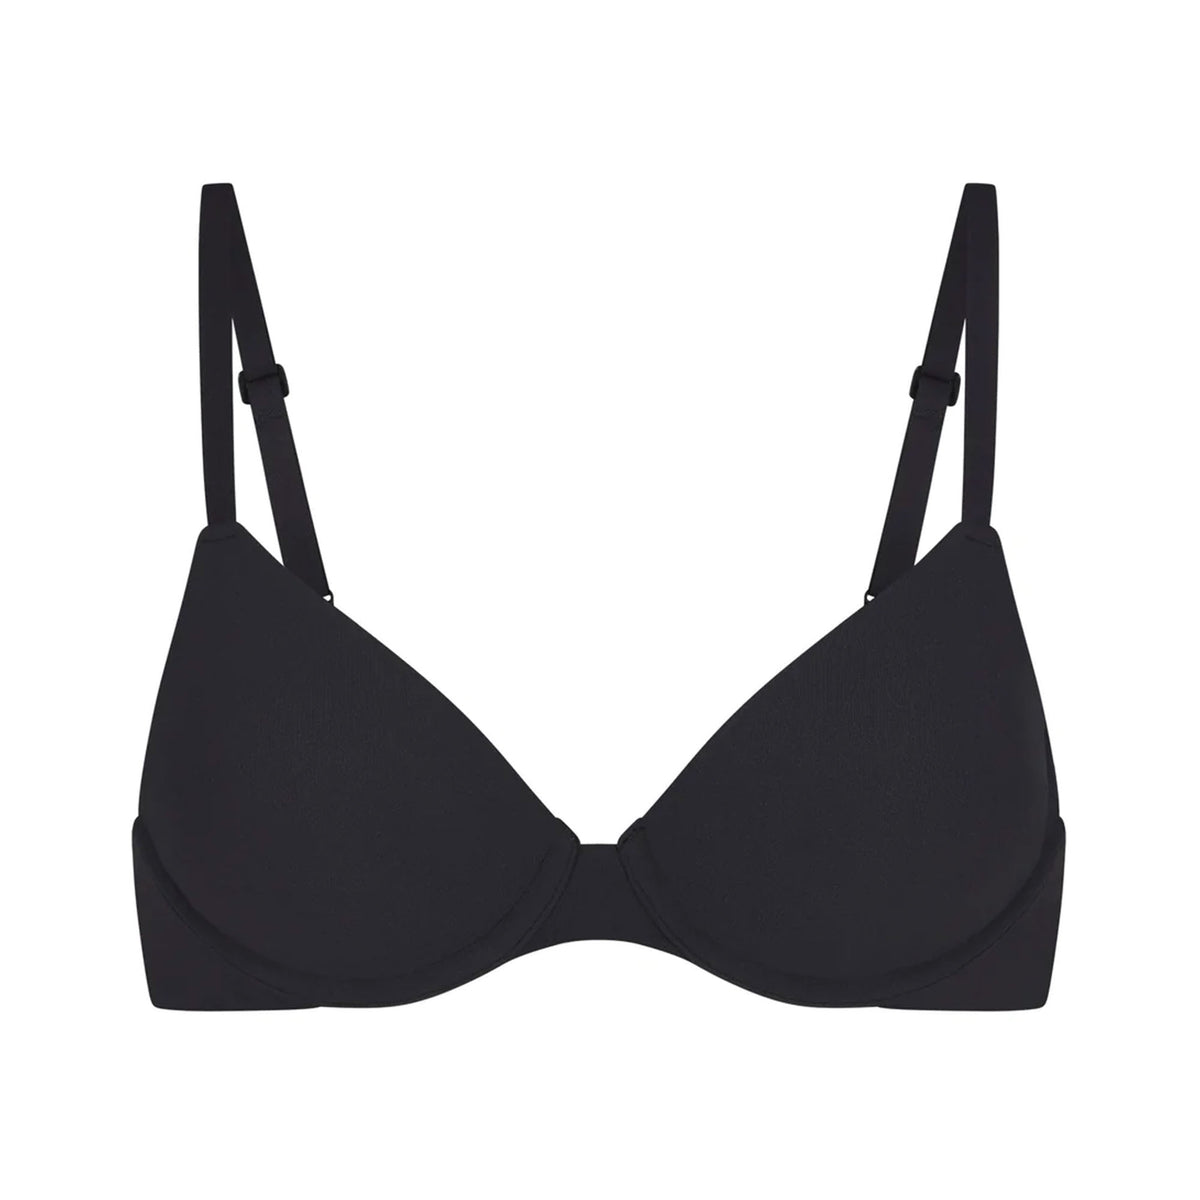 IFG - Our Luxury 02 is the perfect bra for your